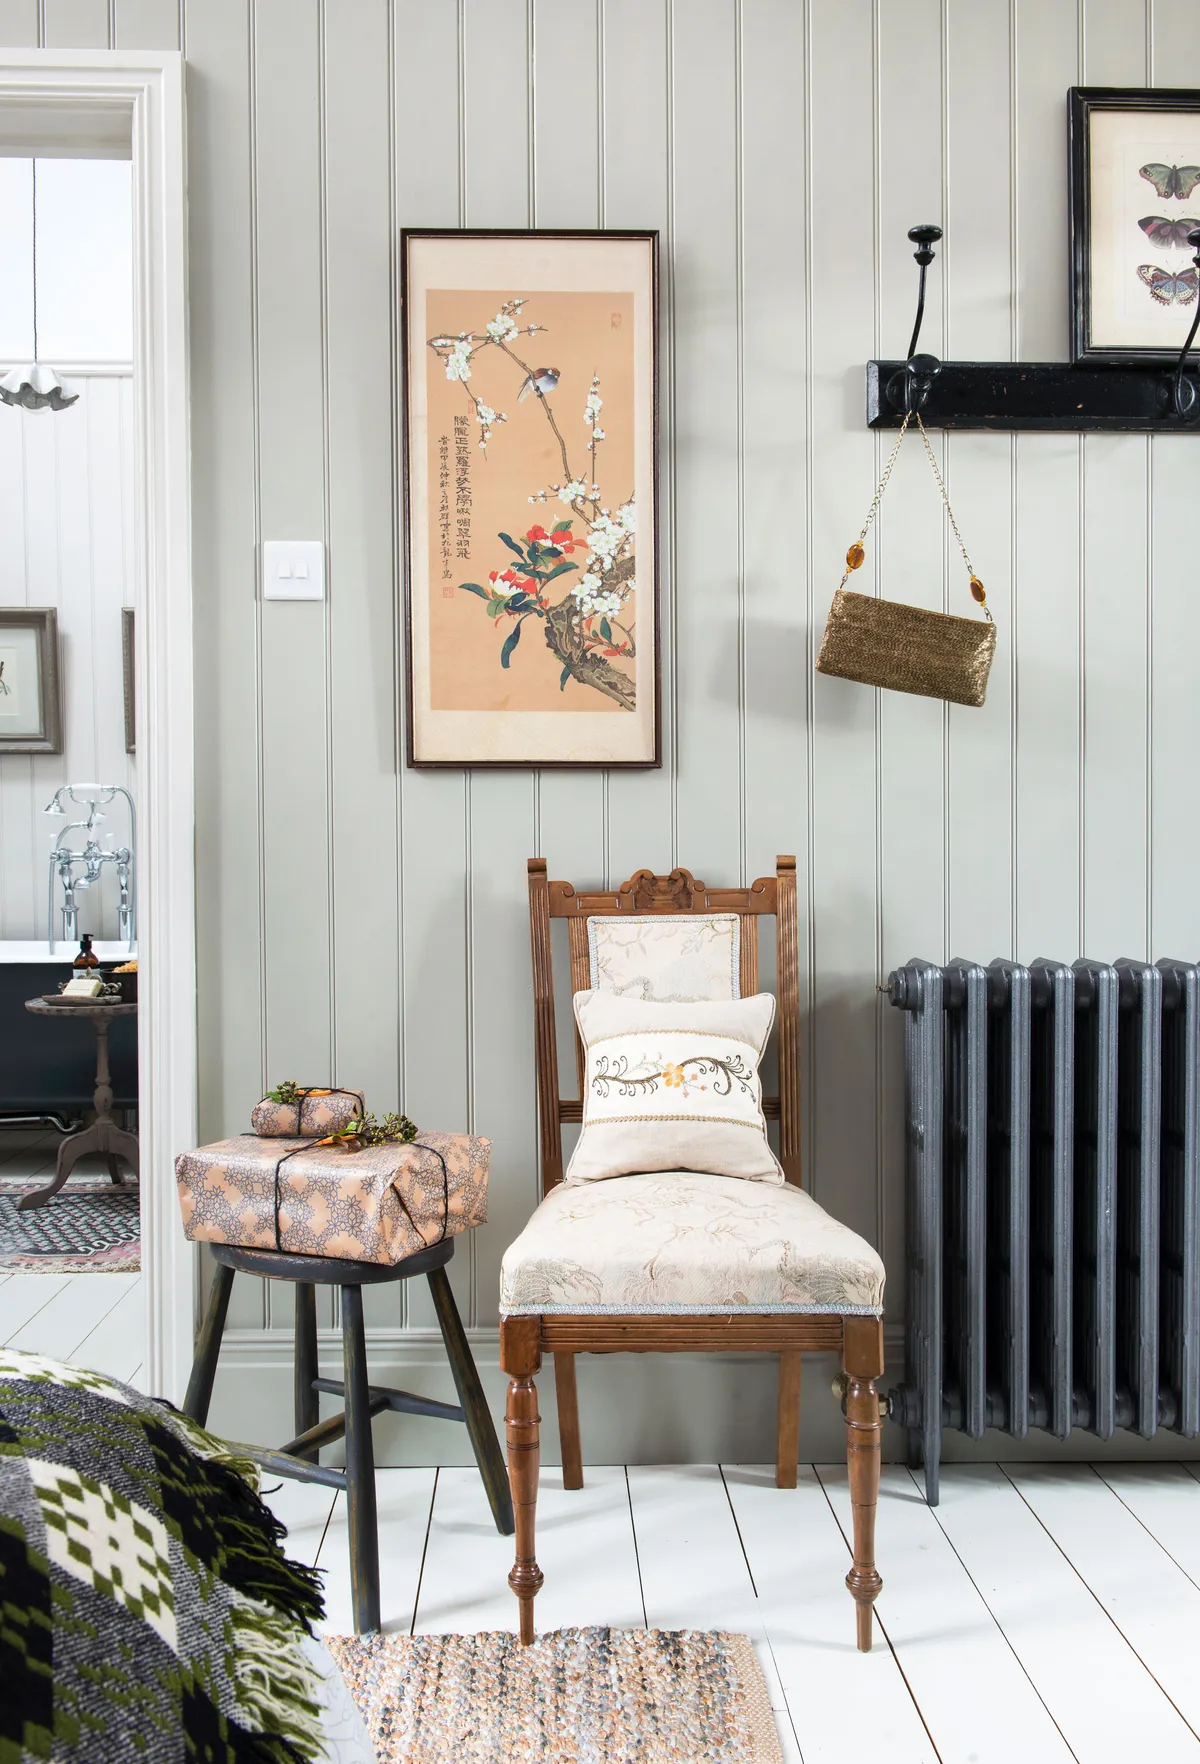 Kay has created continuity between two adjoining spaces by adding panelling in both her bedroom and bathroom, painted in the same colour. She has also carefully curated a selection of vintage pieces for each room for a coherent feel